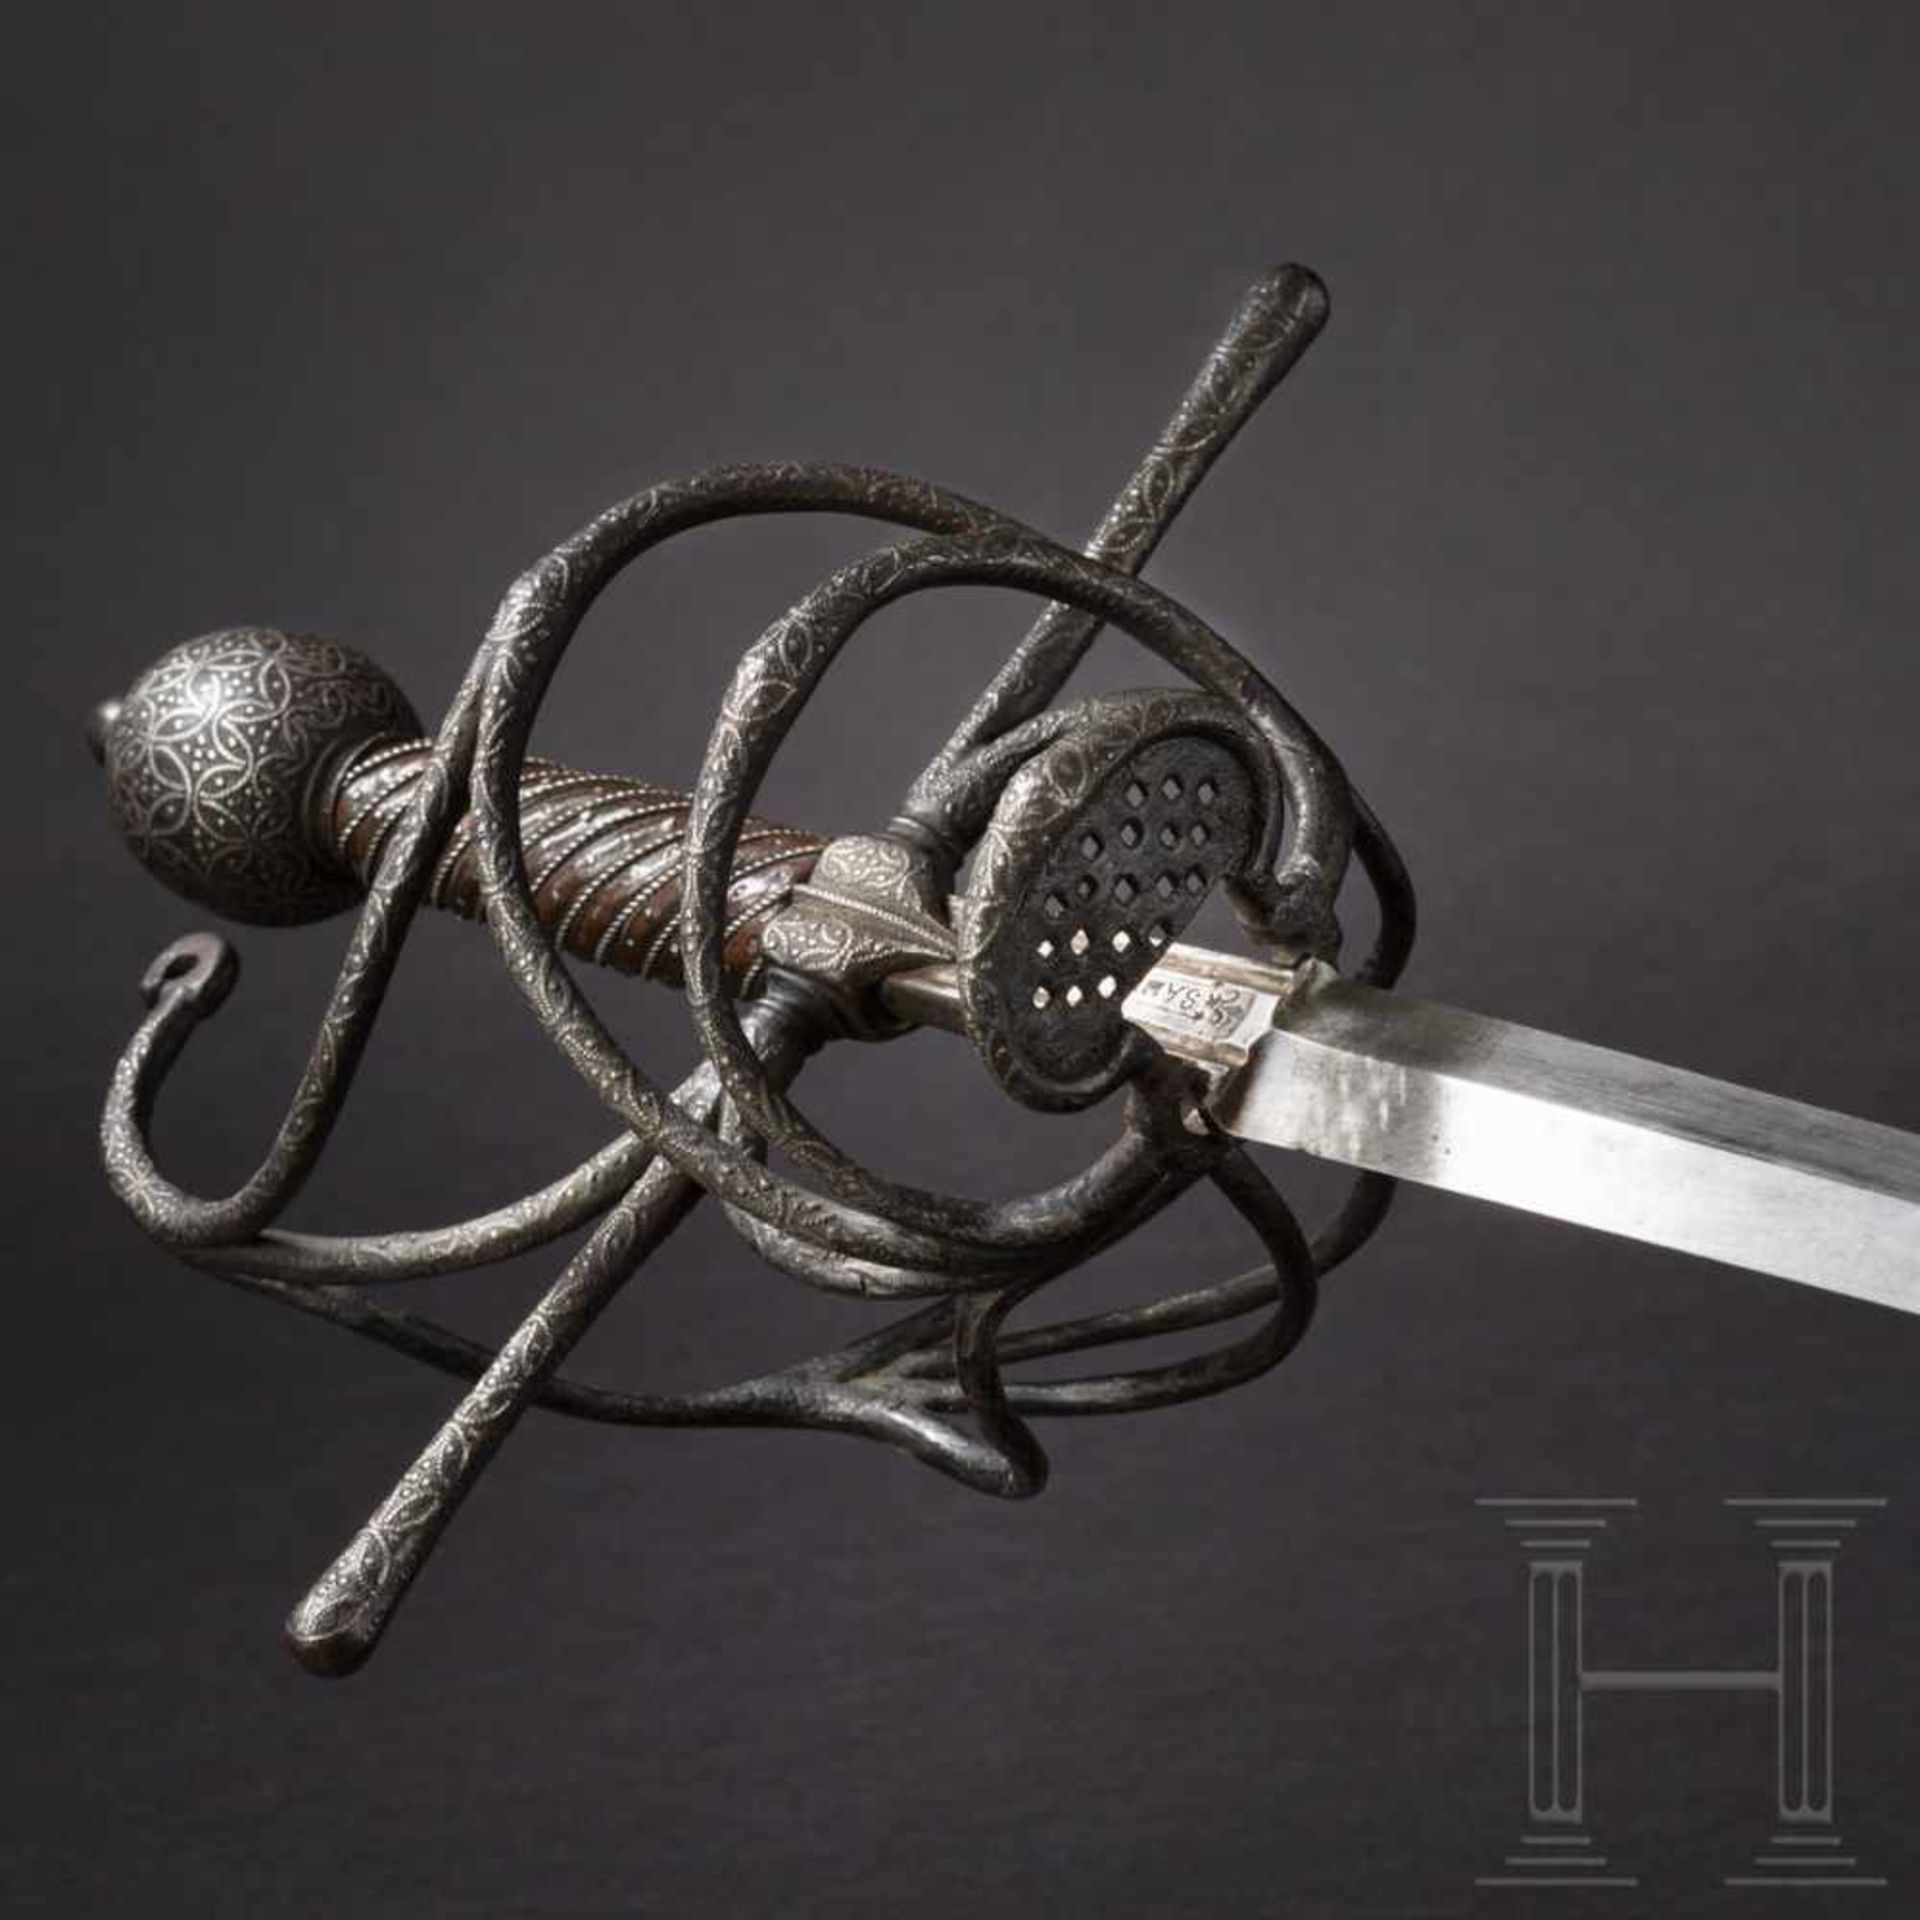 A German silver-inlaid rapier, circa 1600Long, double-edged thrusting blade of diamond section. A